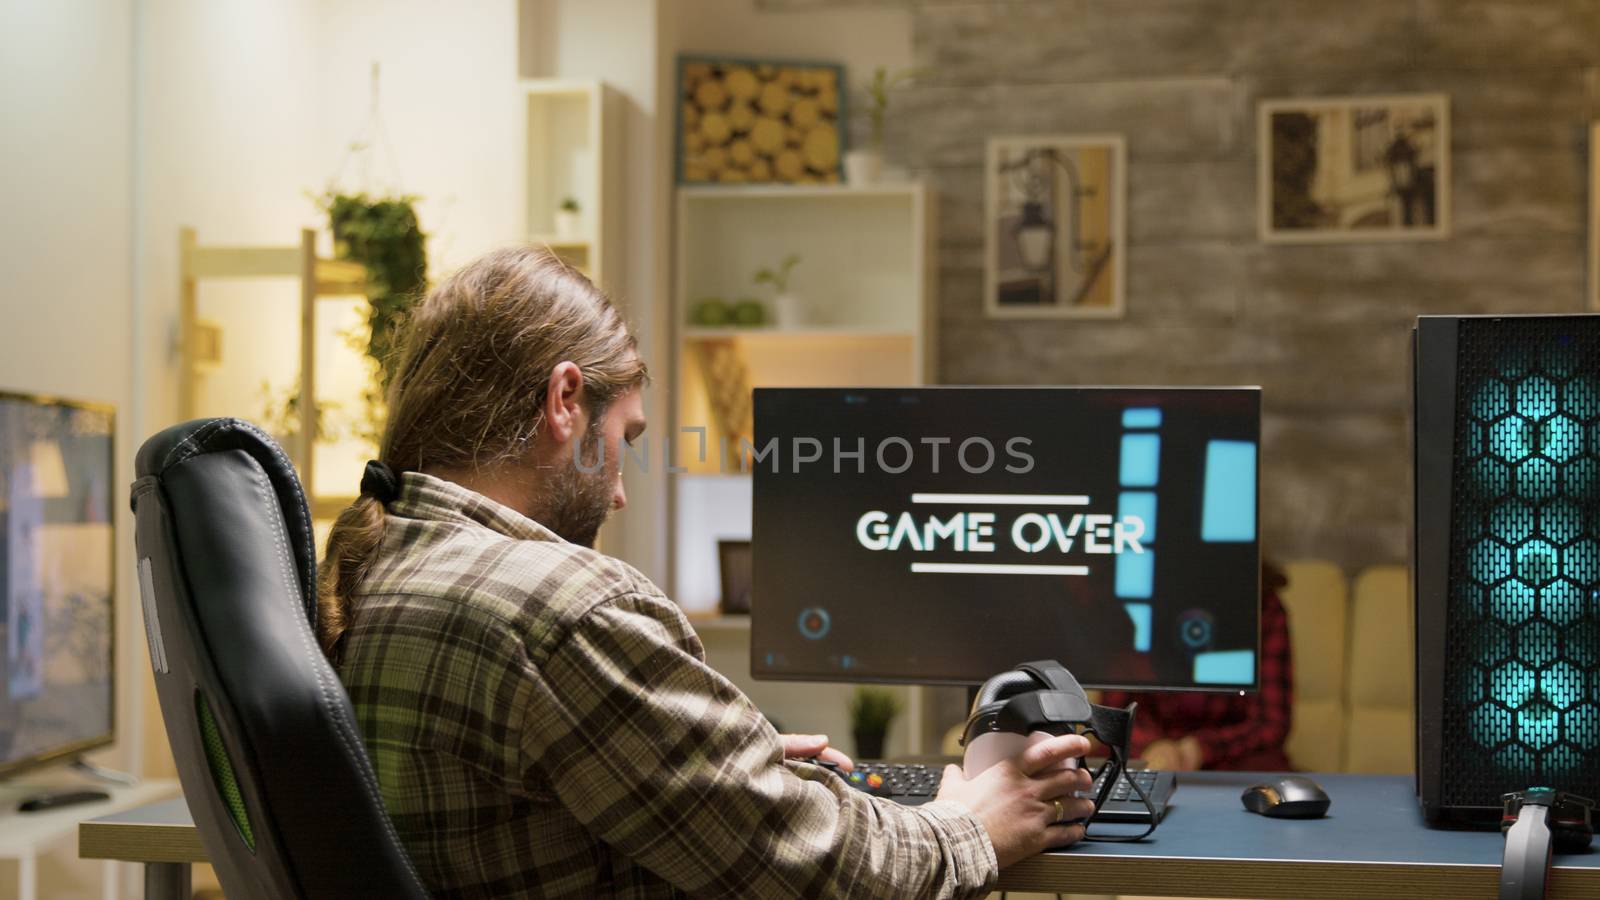 Game over for adult man playing video games by DCStudio